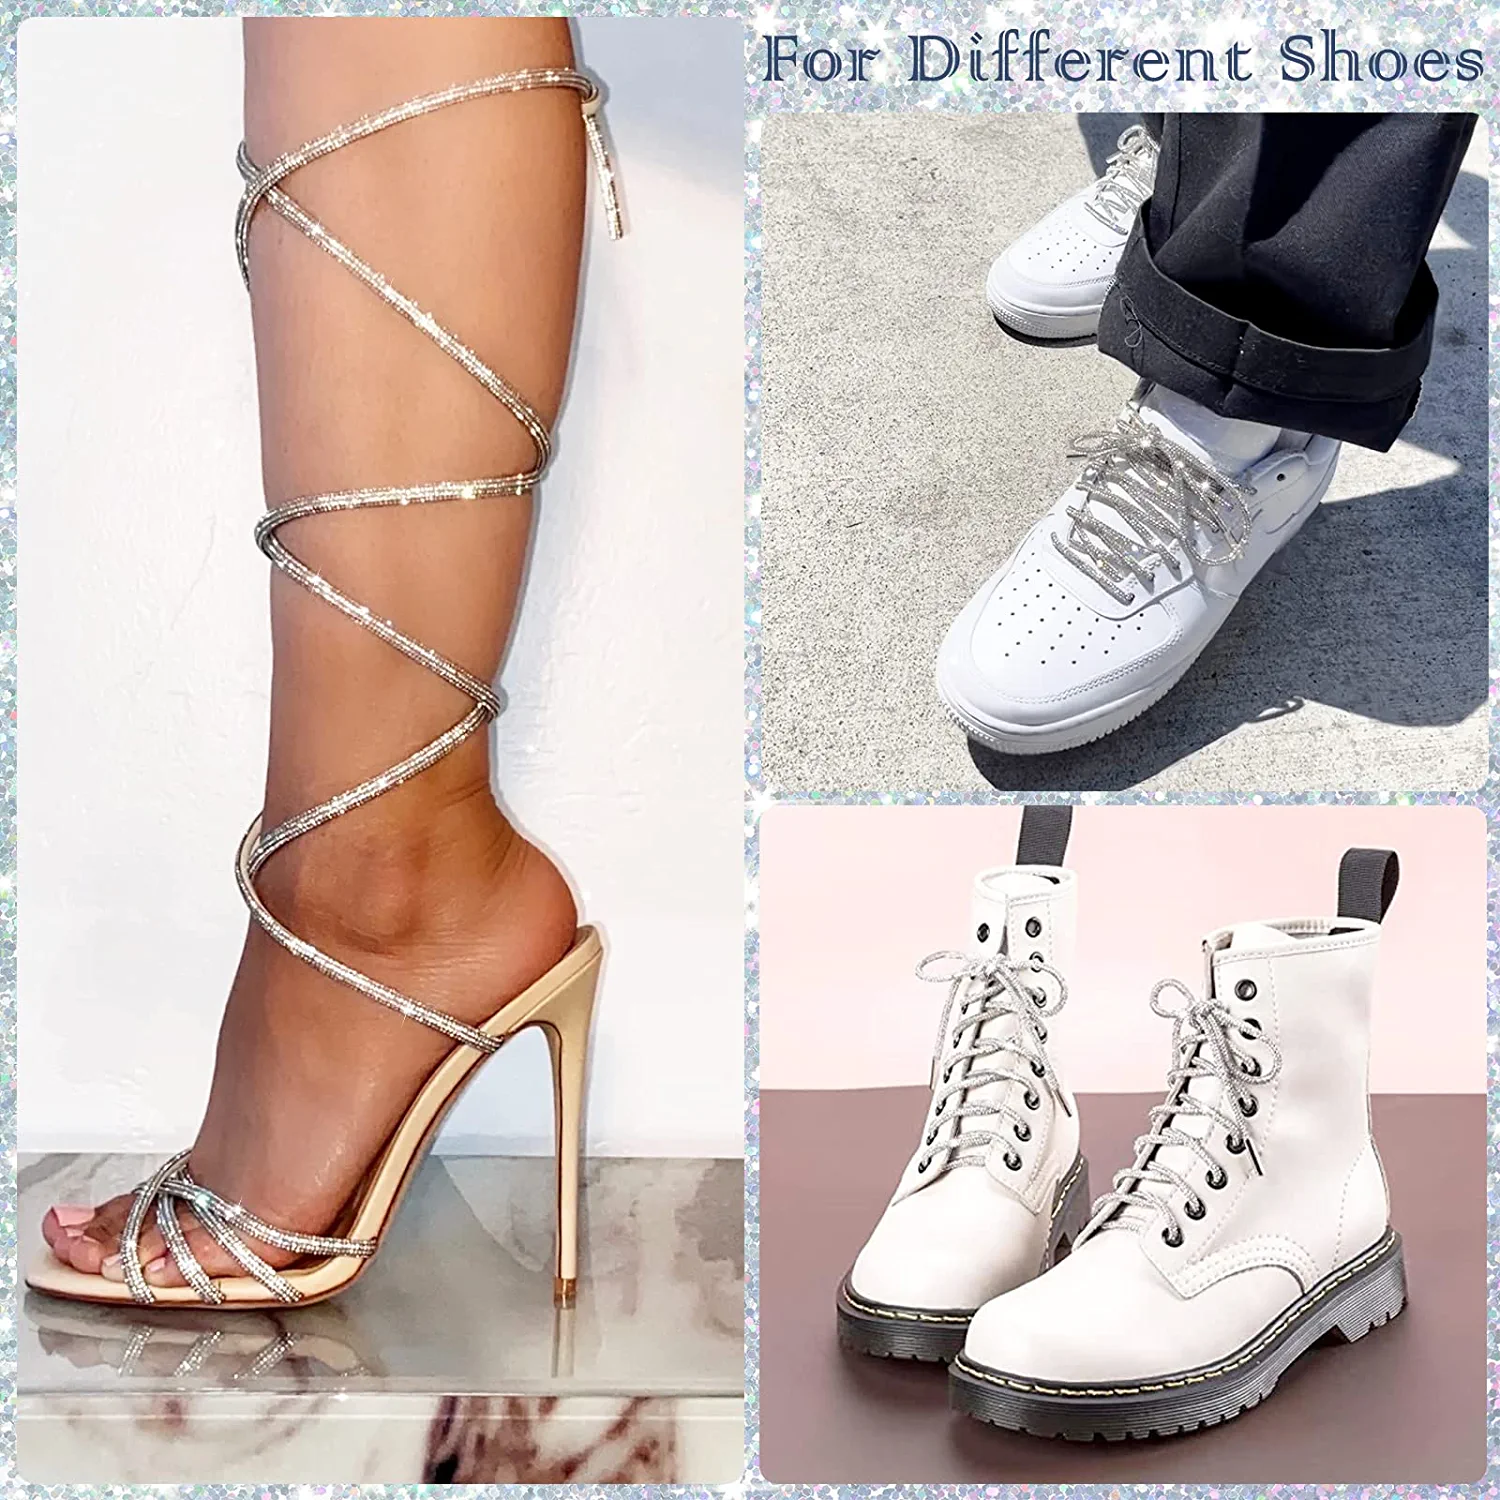 Knifun Rhinestone Shoelace Trousers Rope with Rhinestones Shoe Laces Rhinestone Hoodie String Glitter Cords, Adult Unisex, Size: One size, Silver